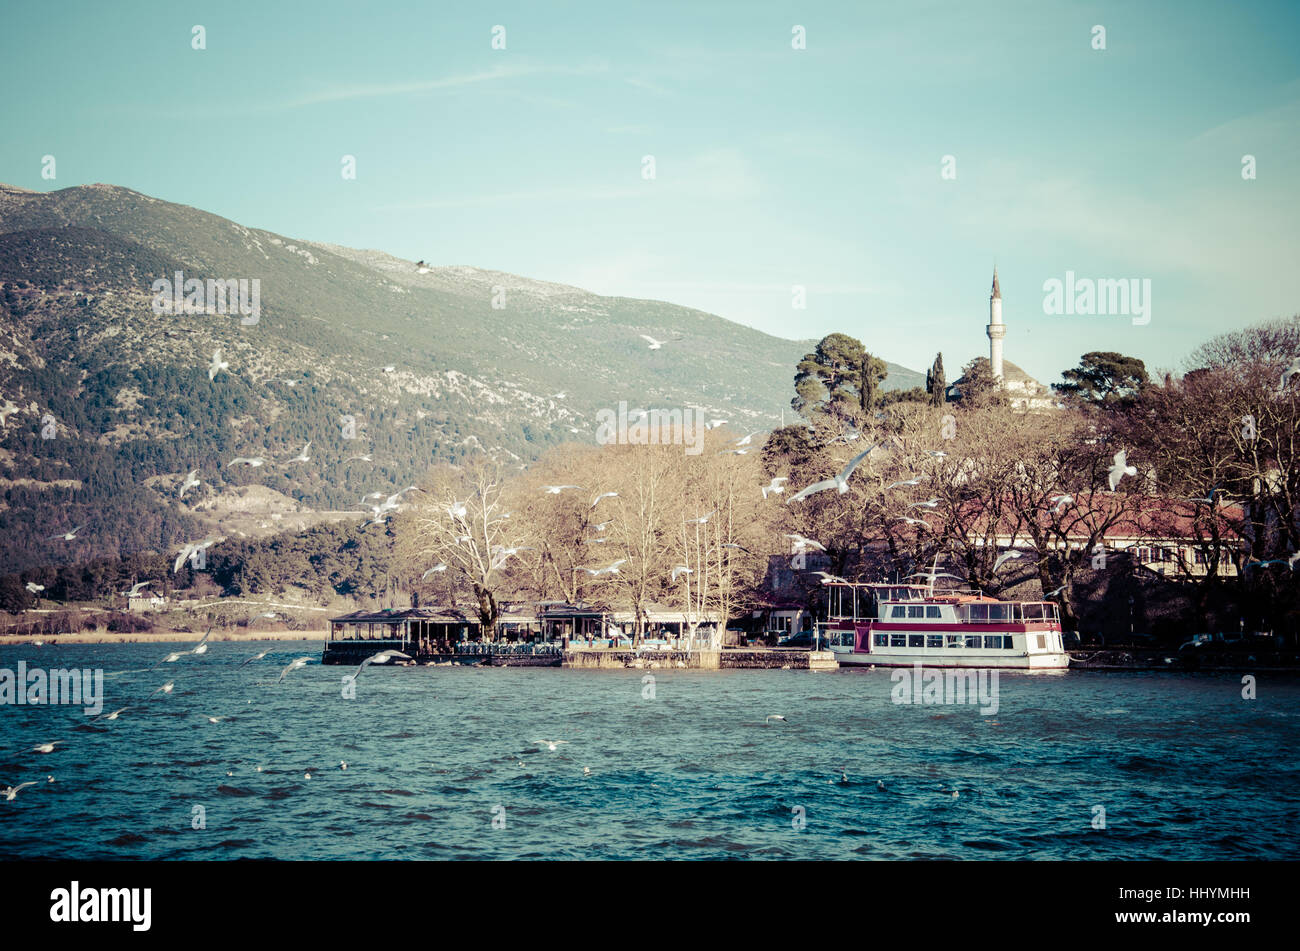 Ioannina city in Greece. View of the lake and the mosque of Aslan Pasa cami with seagulls and swans. Stock Photo